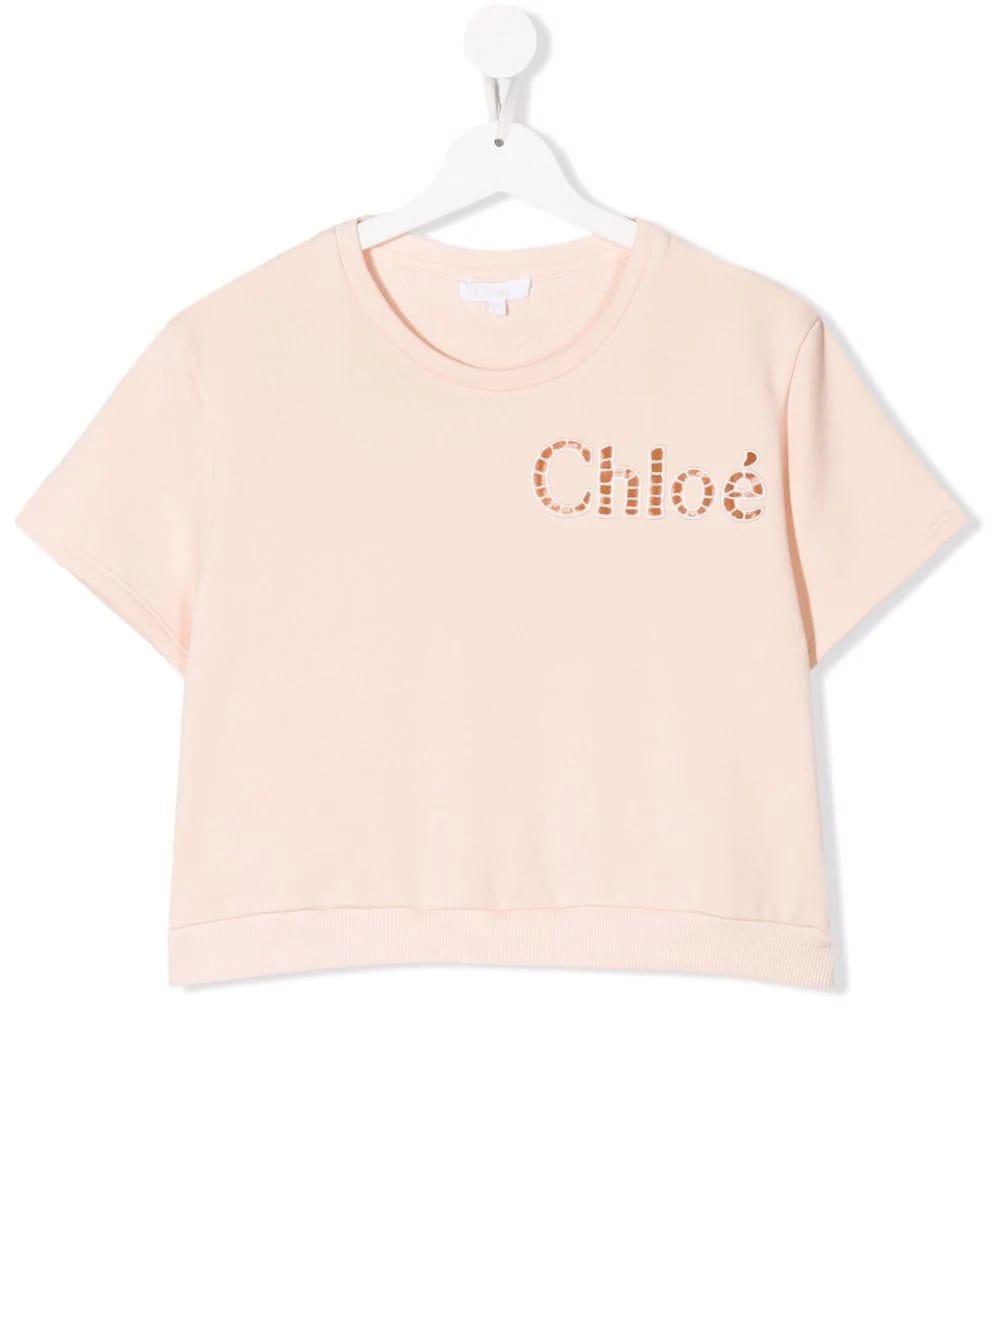 Chloé Kids Short Sleeve Pink Sweatshirt With Perforated Logo